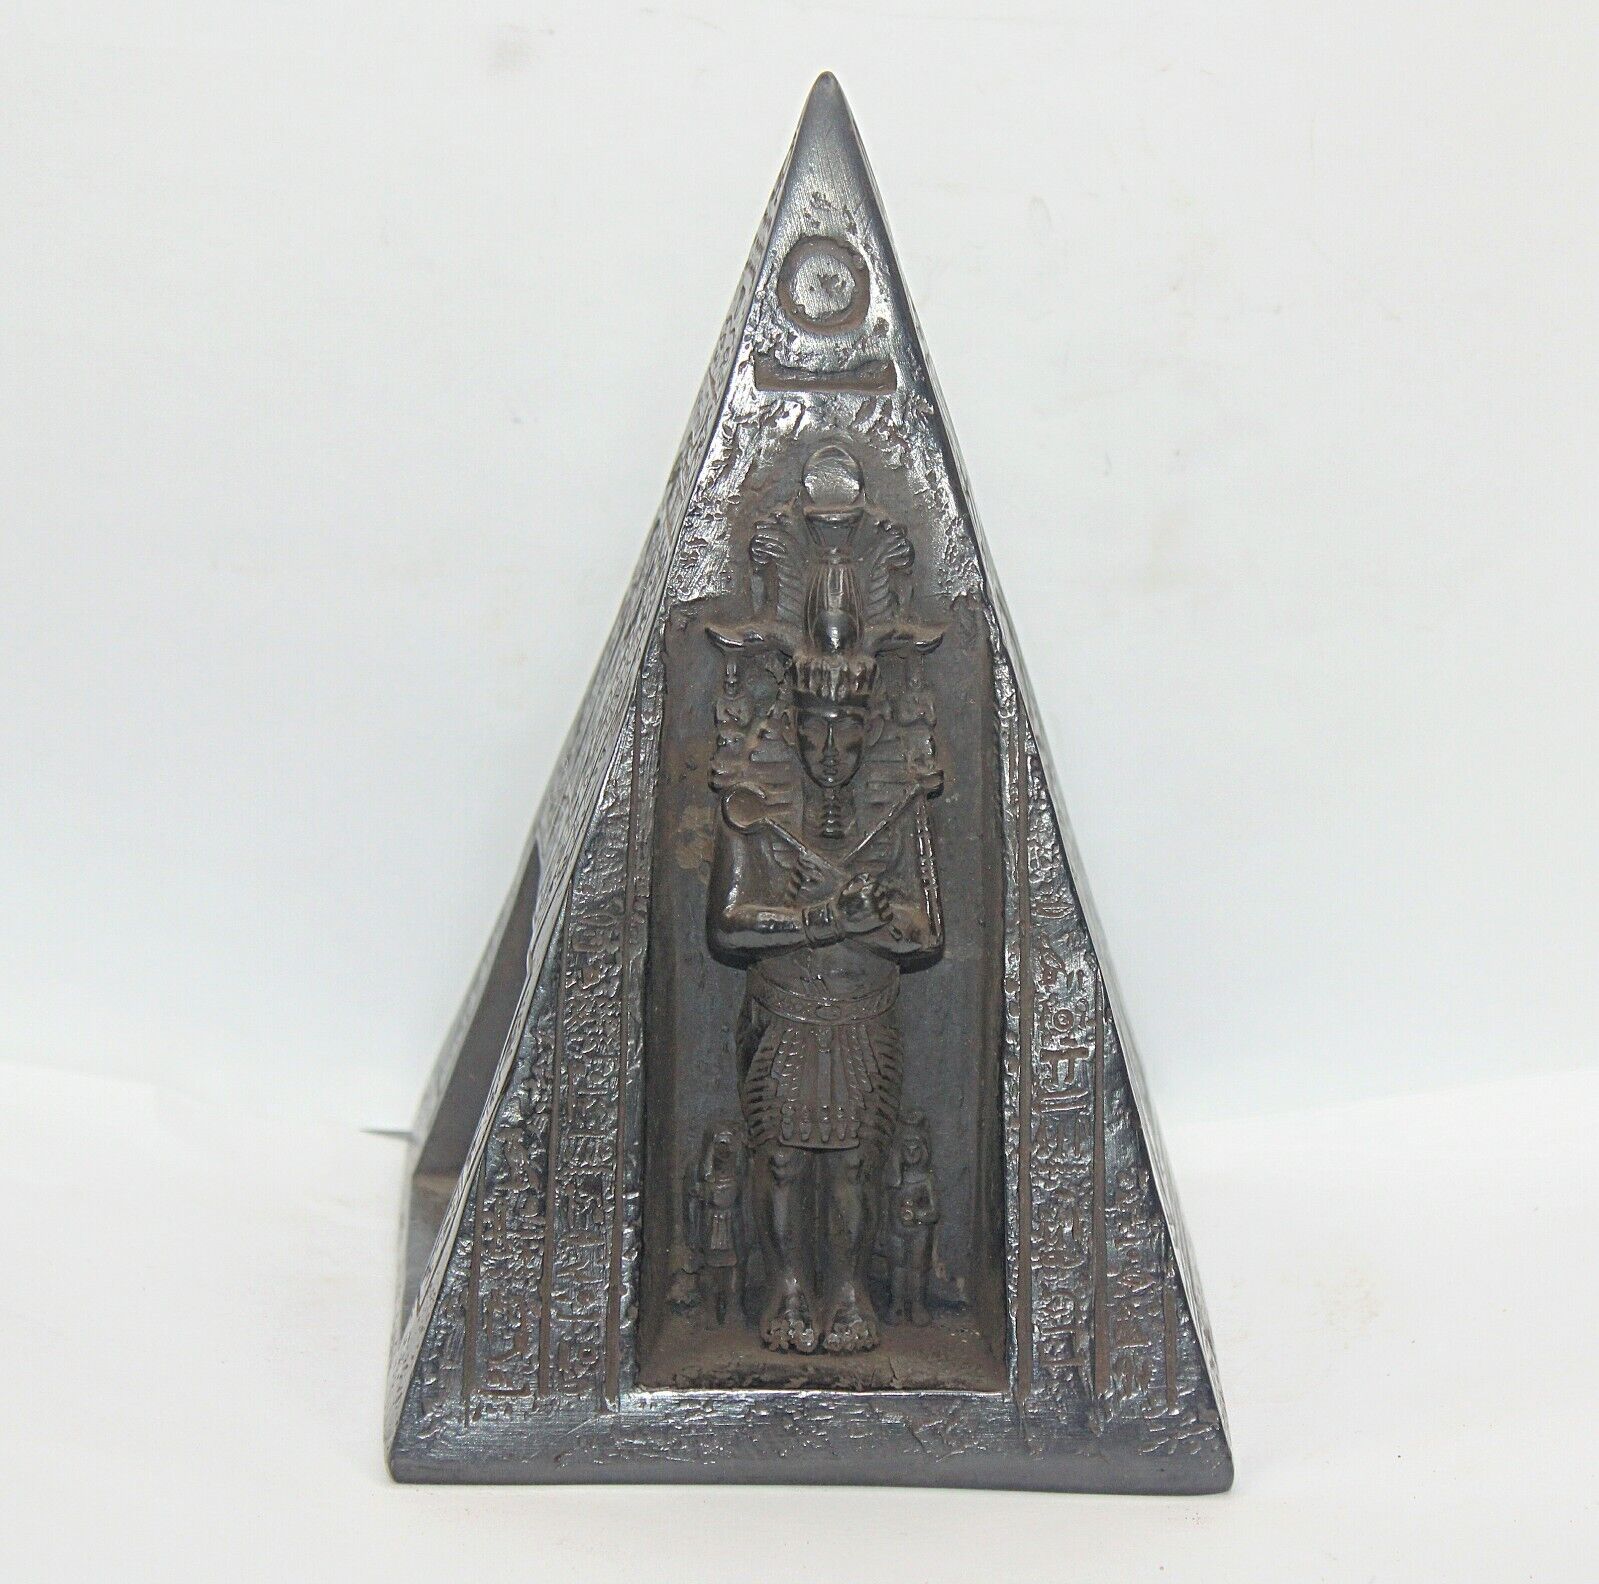 Rare Ancient Egyptian Antique Pyramid Osiris and Horus With Pharaonic Protection